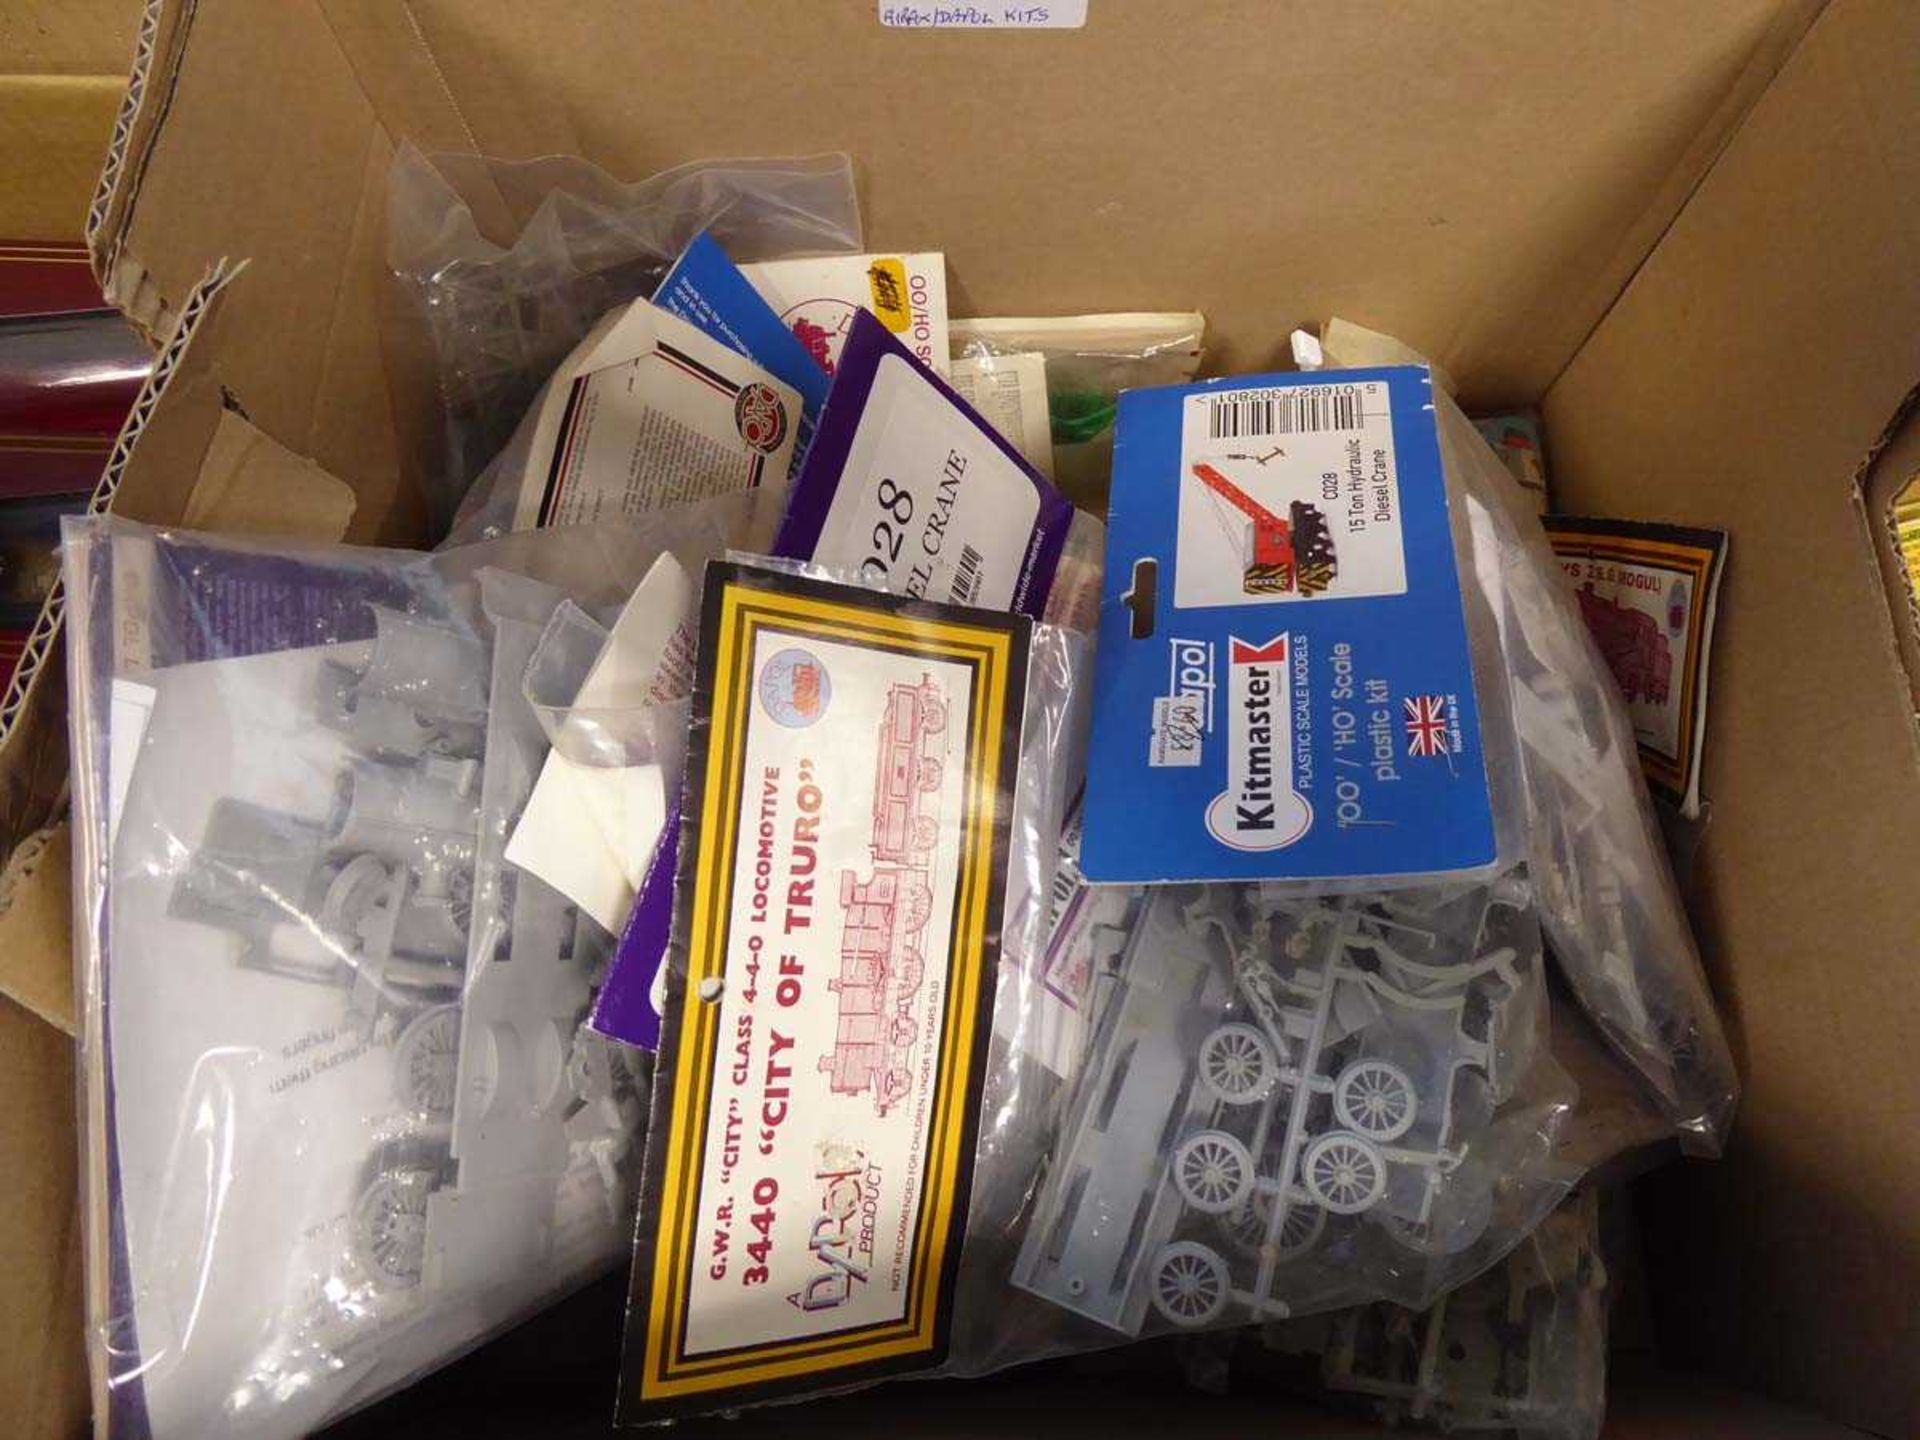 Box containing various model kits,turn table kits and other items by Airfix